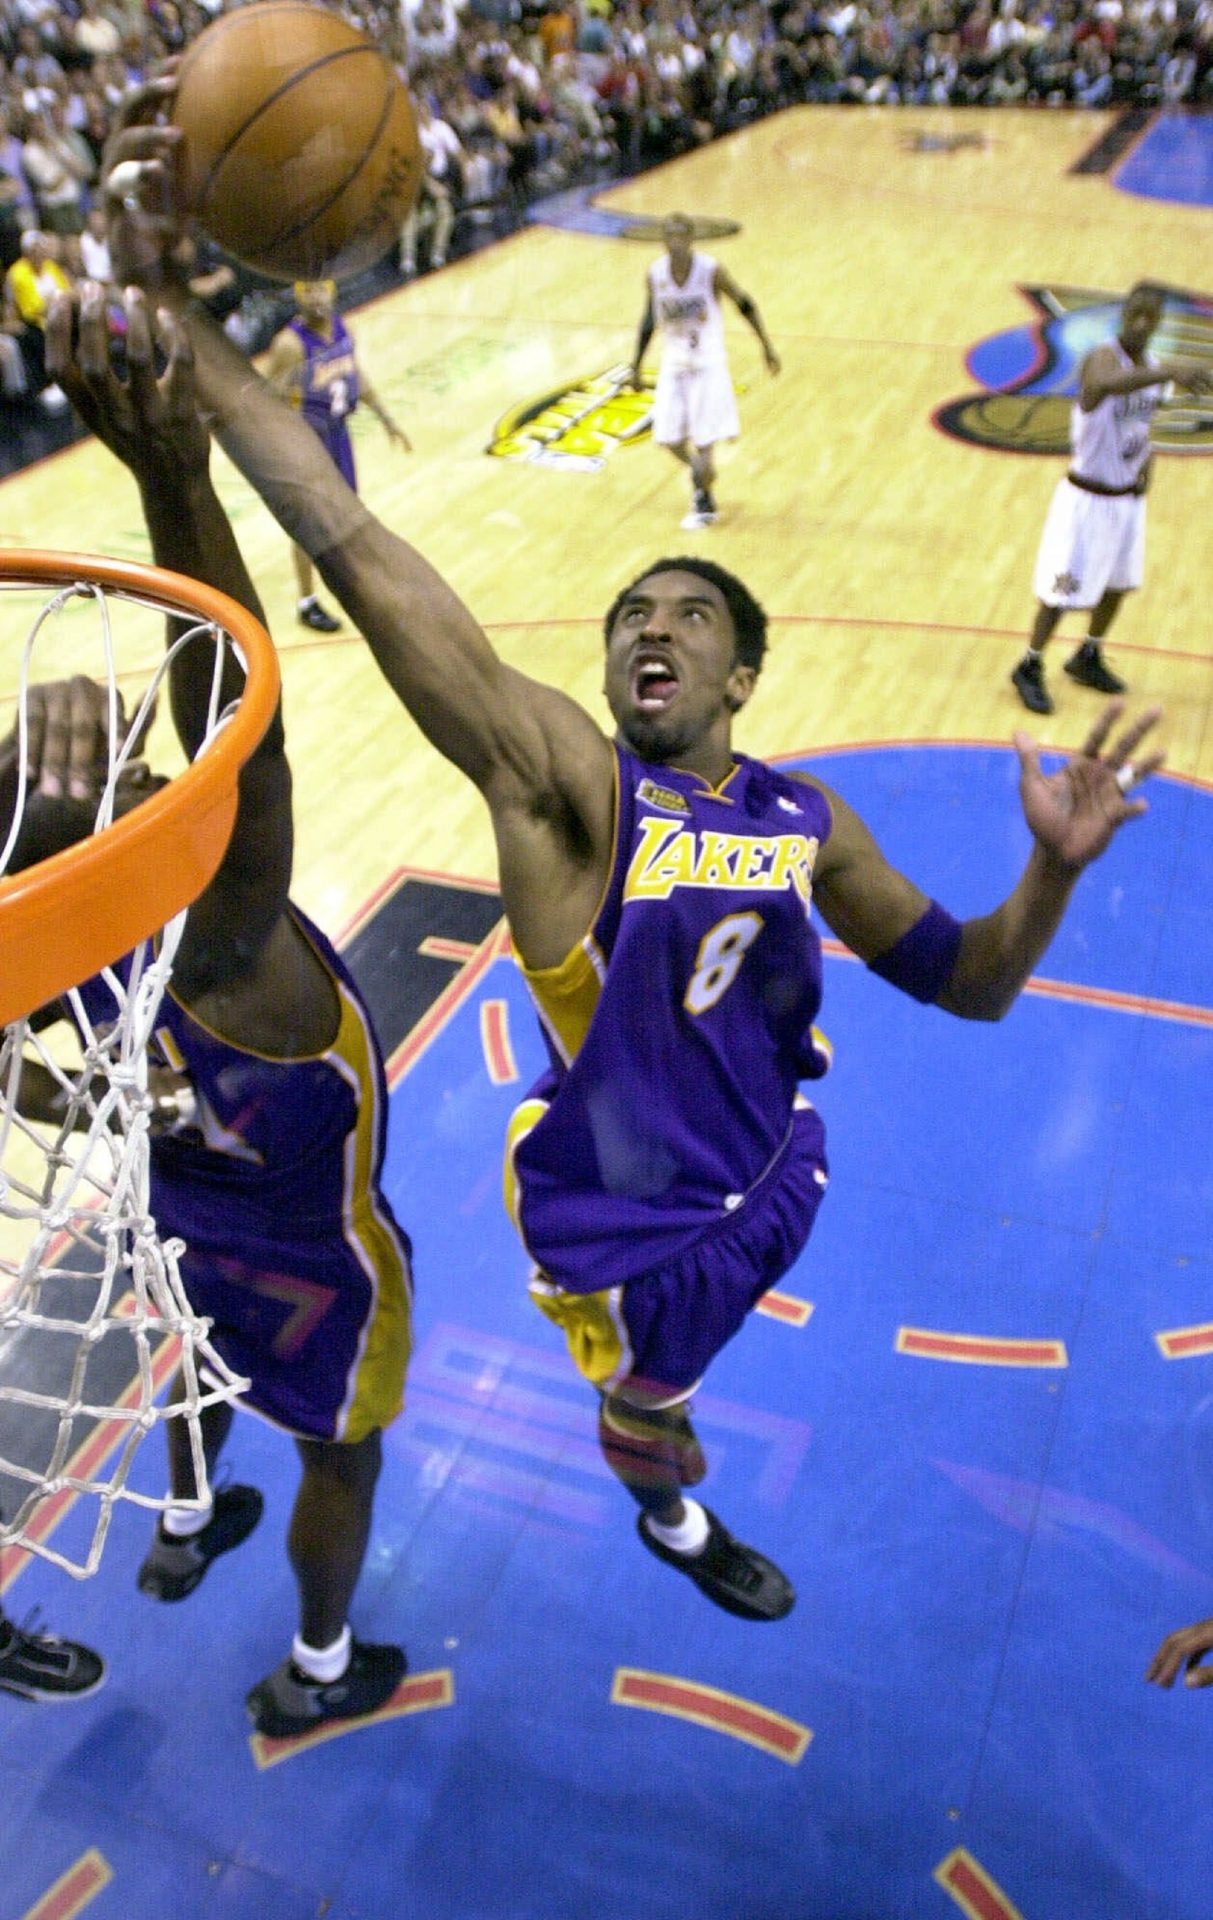 Los Angeles Lakers' Kobe Bryant goes up for a rebound in the fourth quarter against the Philadelphia 76ers' in game 5 of the NBA finals Friday June 15, 2001 in Philadelphia. The Lakers won their second straight NBA championship, defeating the 76ers 108-96 to clinch the best-of-seven series 4-1.